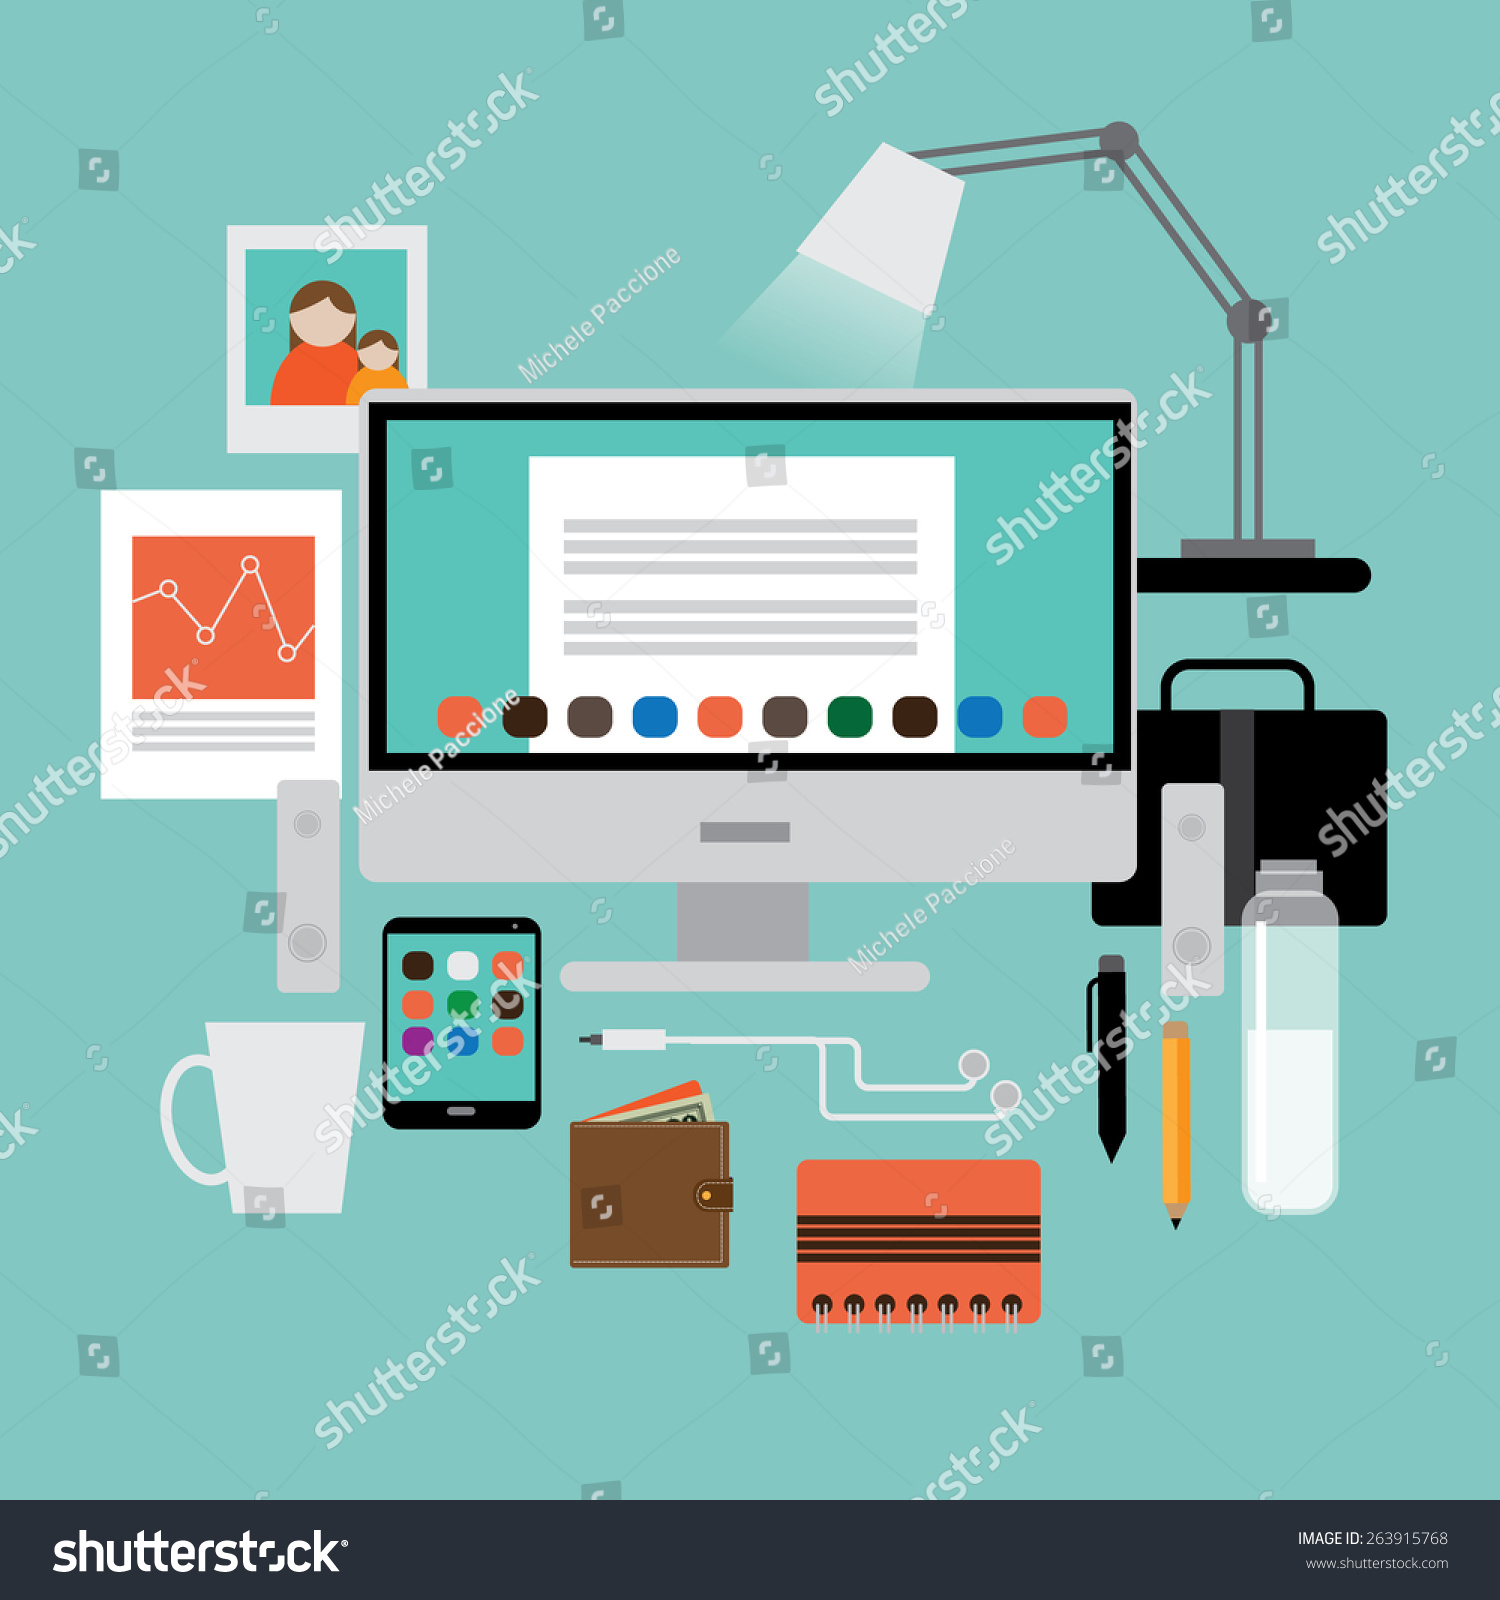 Flat design mans workspace items Royalty free stock illustration for ads marketing poster